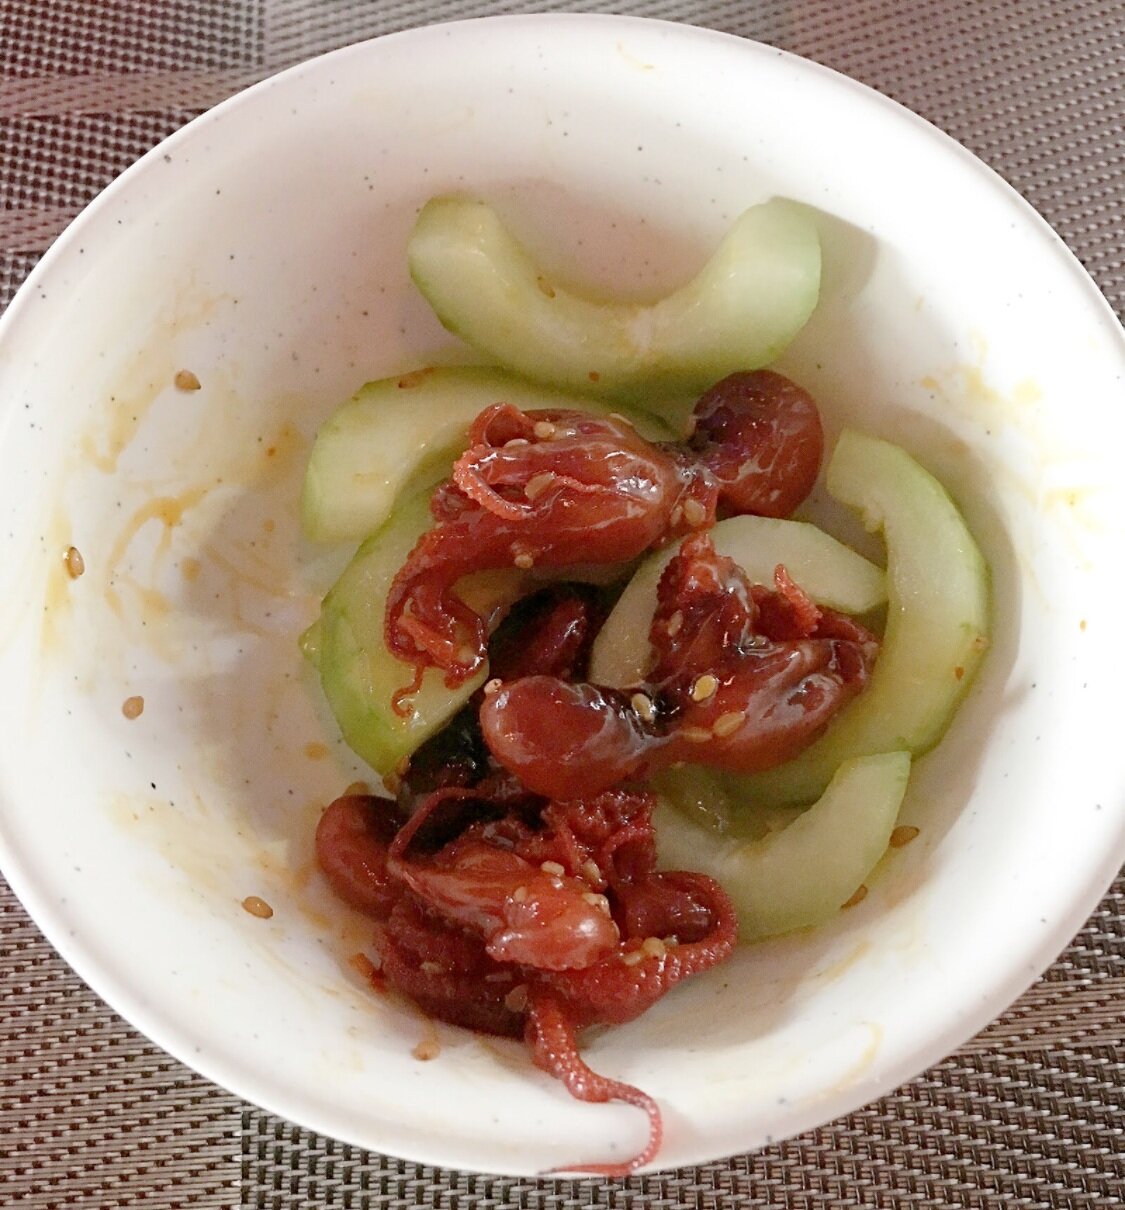  The dish that started it all!  Baby octopus  in delicious seasonings and cucumber slices. 